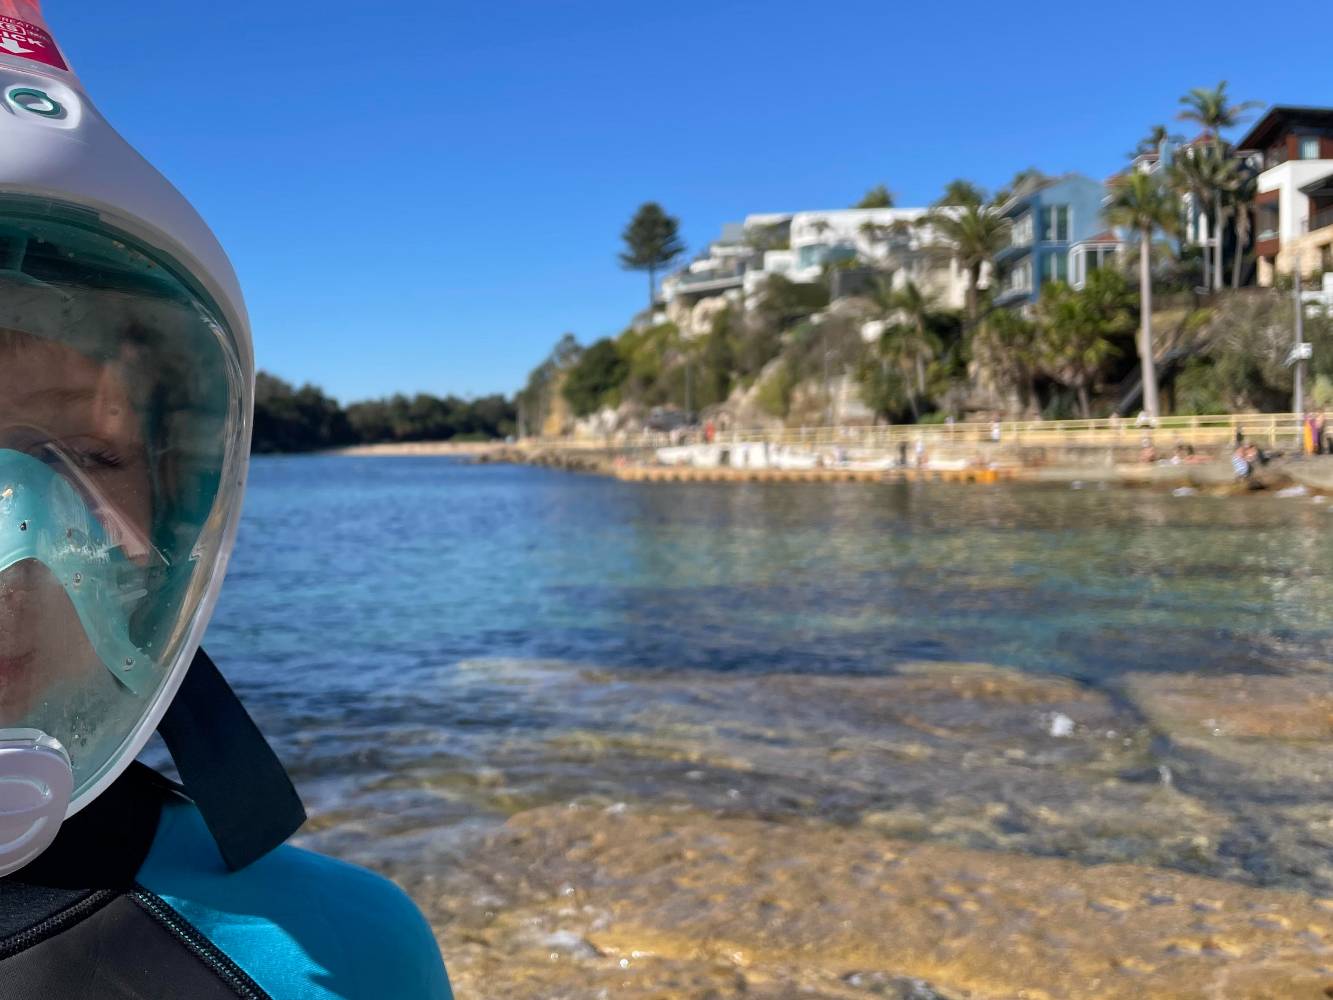 Snorkelling, Manly